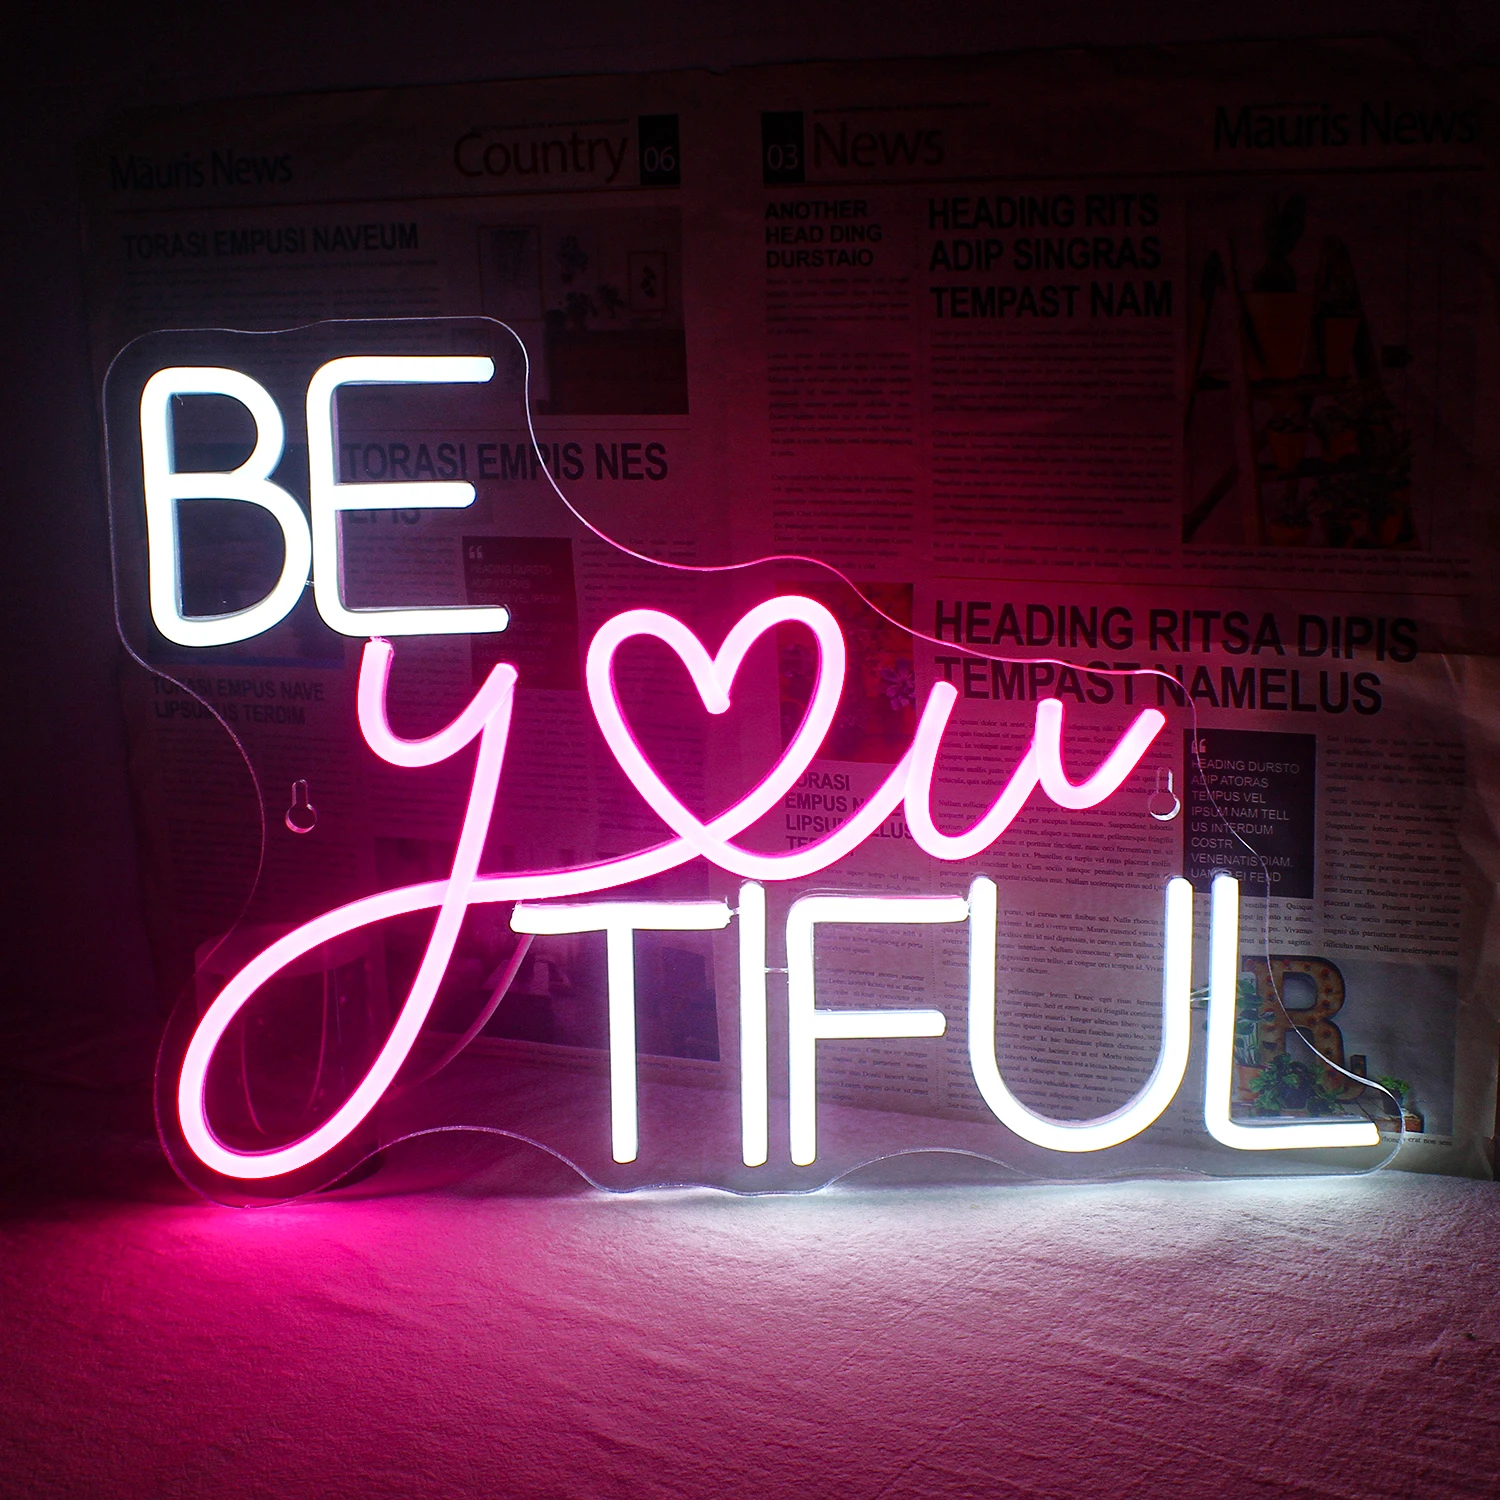 Beautiful Neon Sign LED Light Home Bar Shop Party Personalized Hang Bedroom Make up Beauty Room ART Wall Decor Lamp Girl Gift beautiful neon sign led light home bar shop party personalized hang bedroom make up beauty room art wall decor lamp girl gift